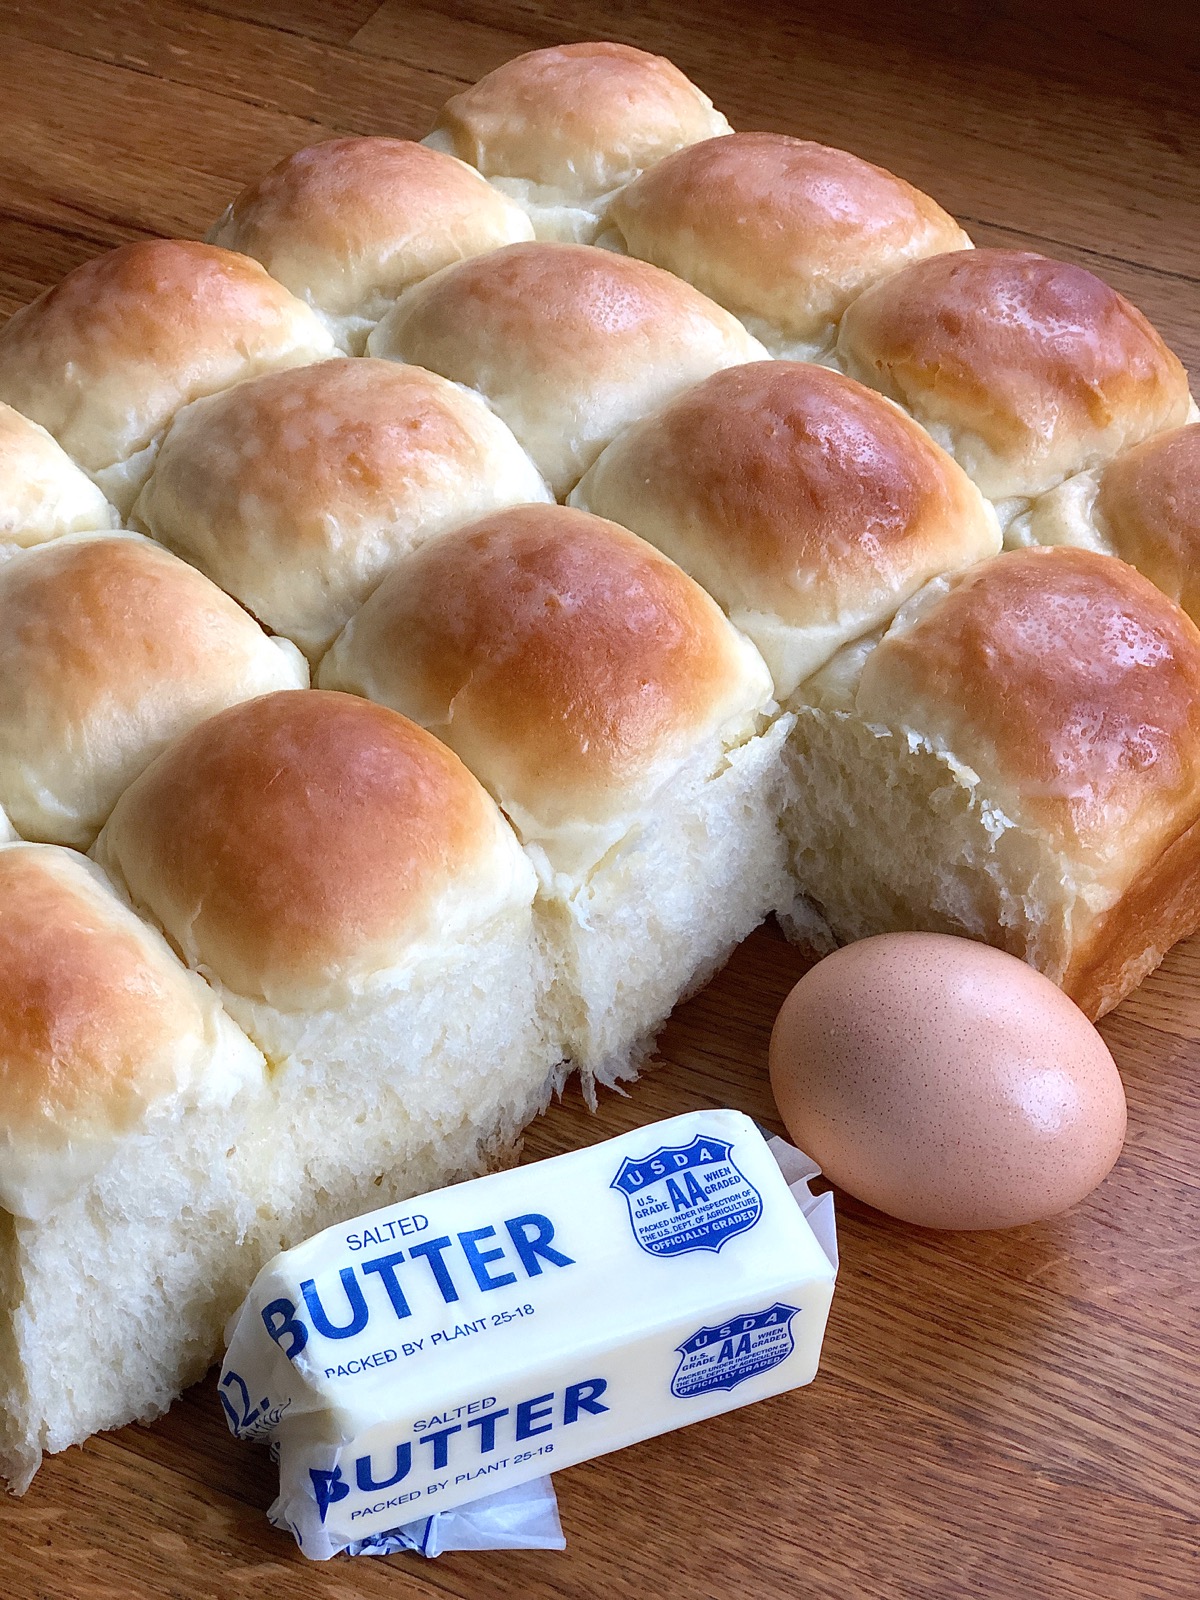 Amish Dinner Rolls shown beside a large egg and a stick of butter, for scale.